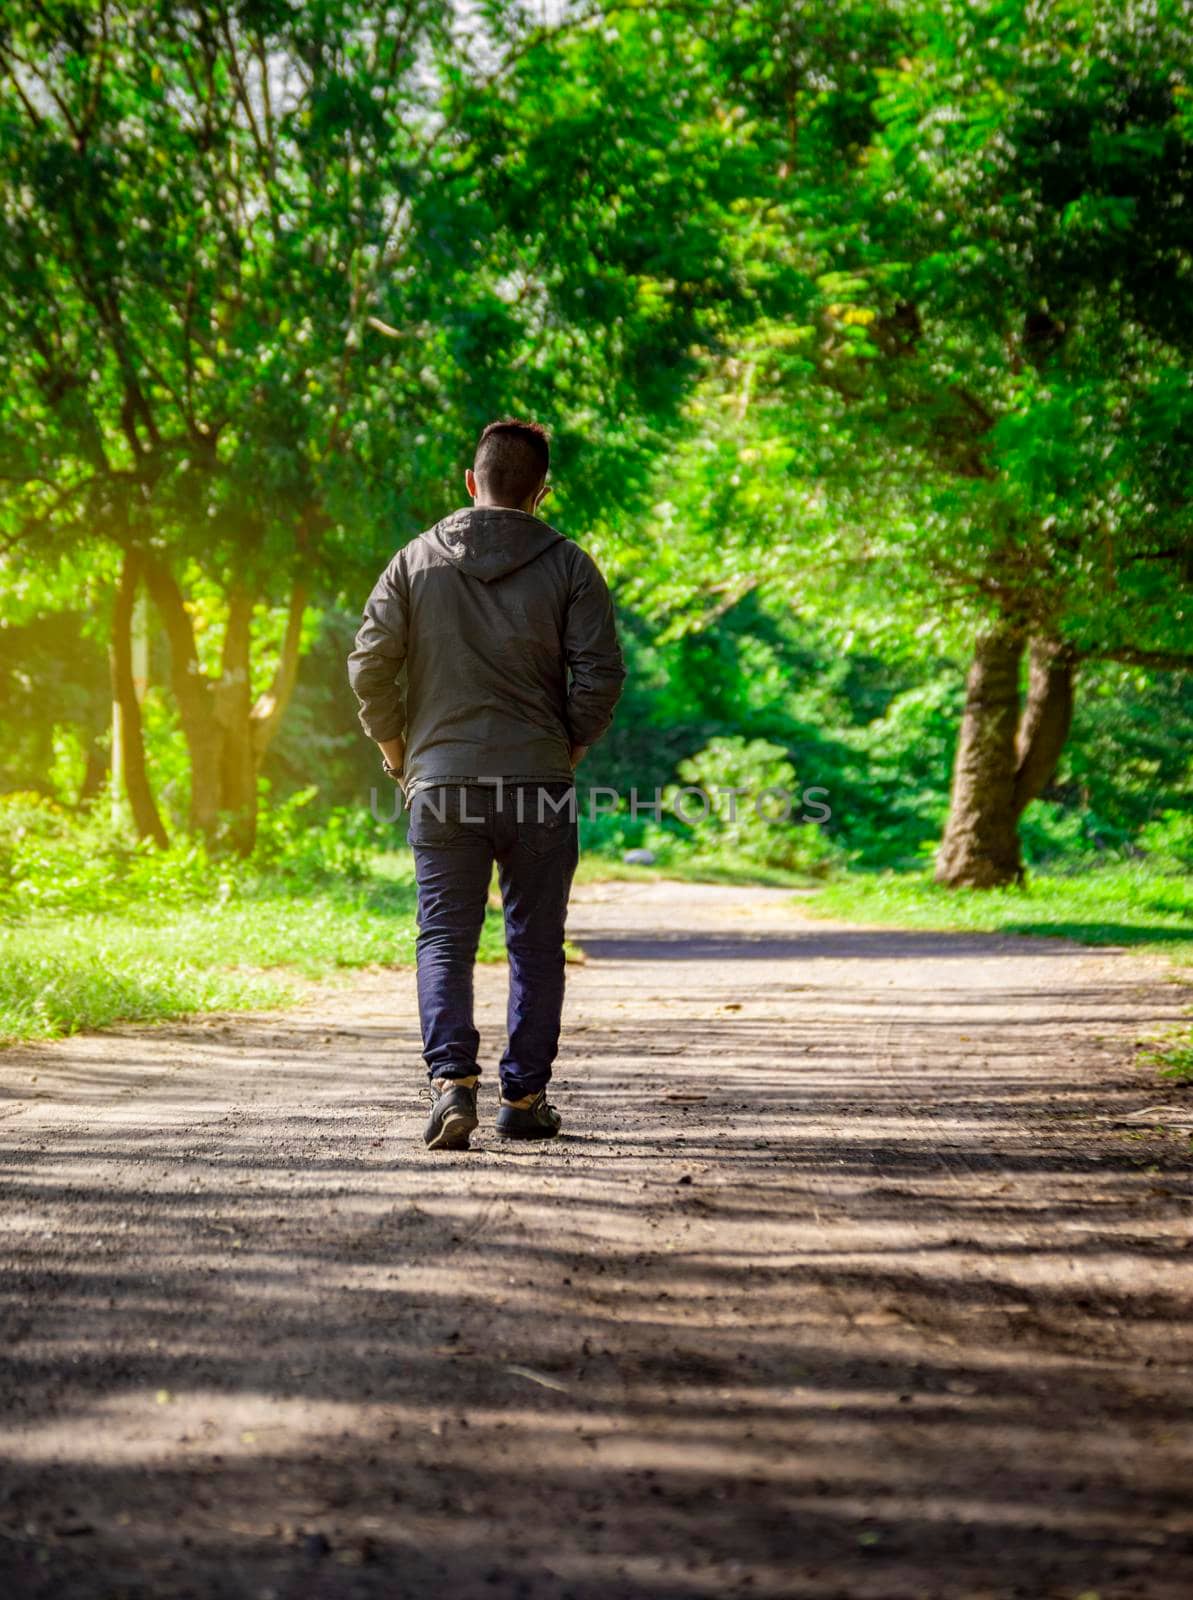 Man walking down a desolate road, man walking backwards on a road surrounded by vegetation